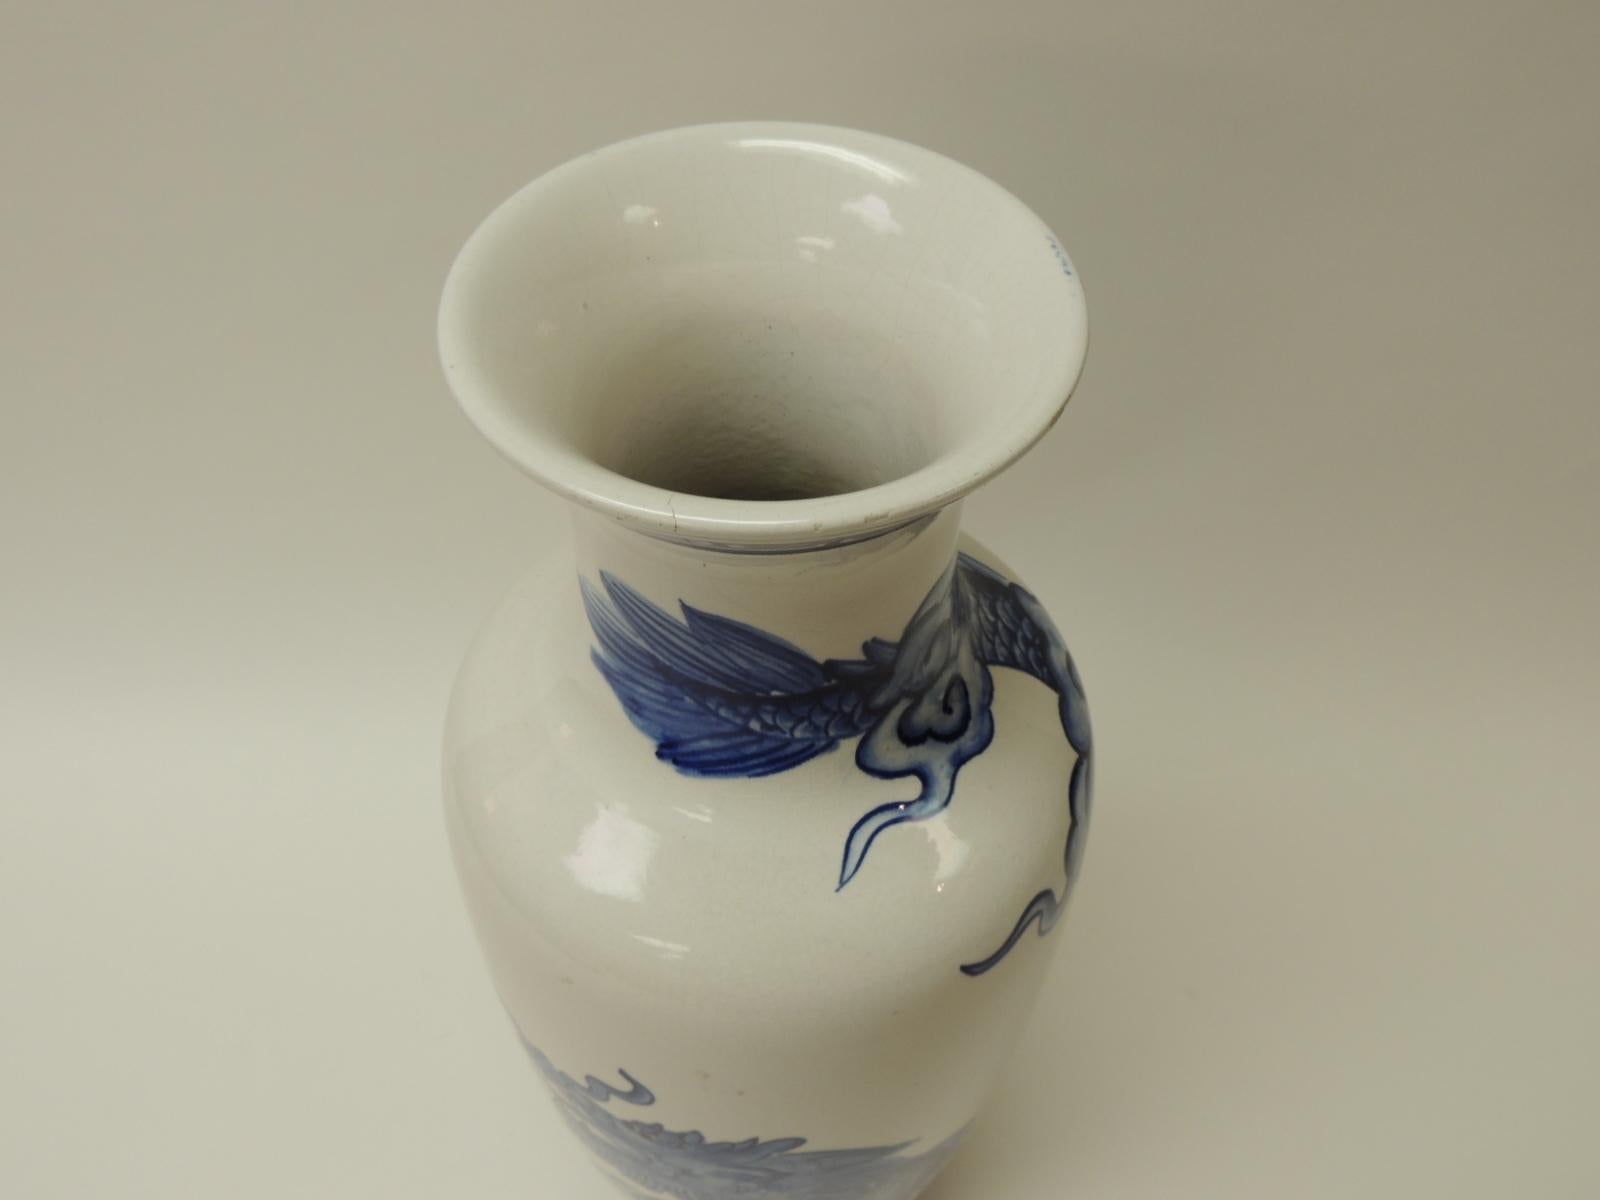 Vintage Blue and White Porcelain Asian Tall Vase (Chinesischer Export)